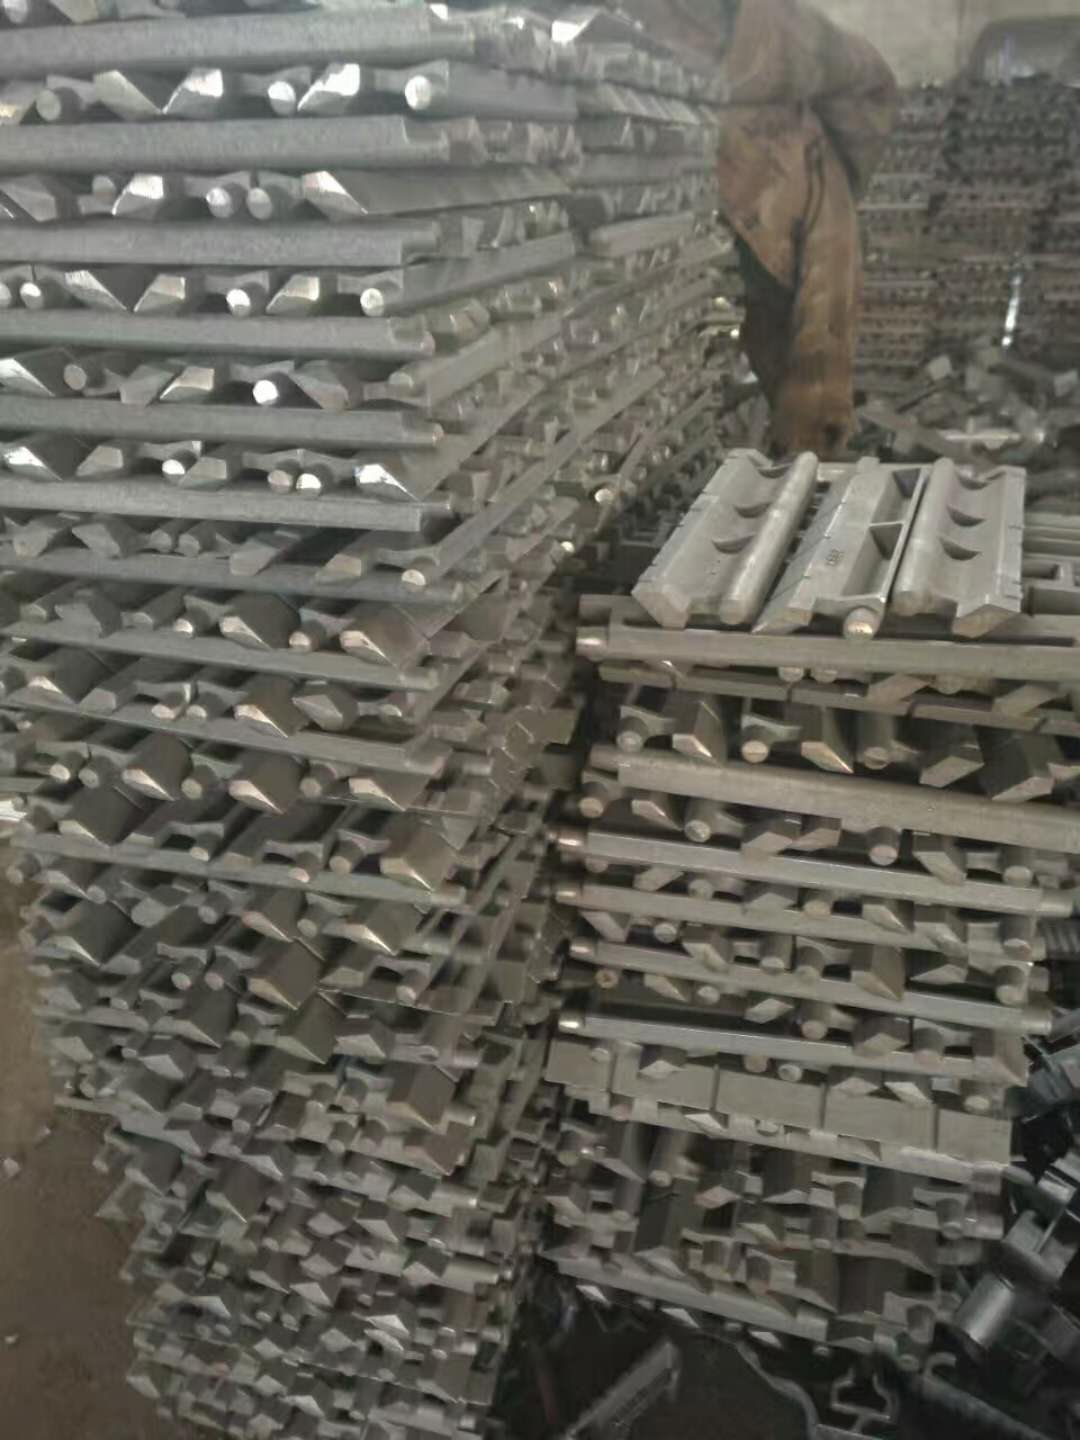 Large scale Chain Grate Stoker Spare Parts